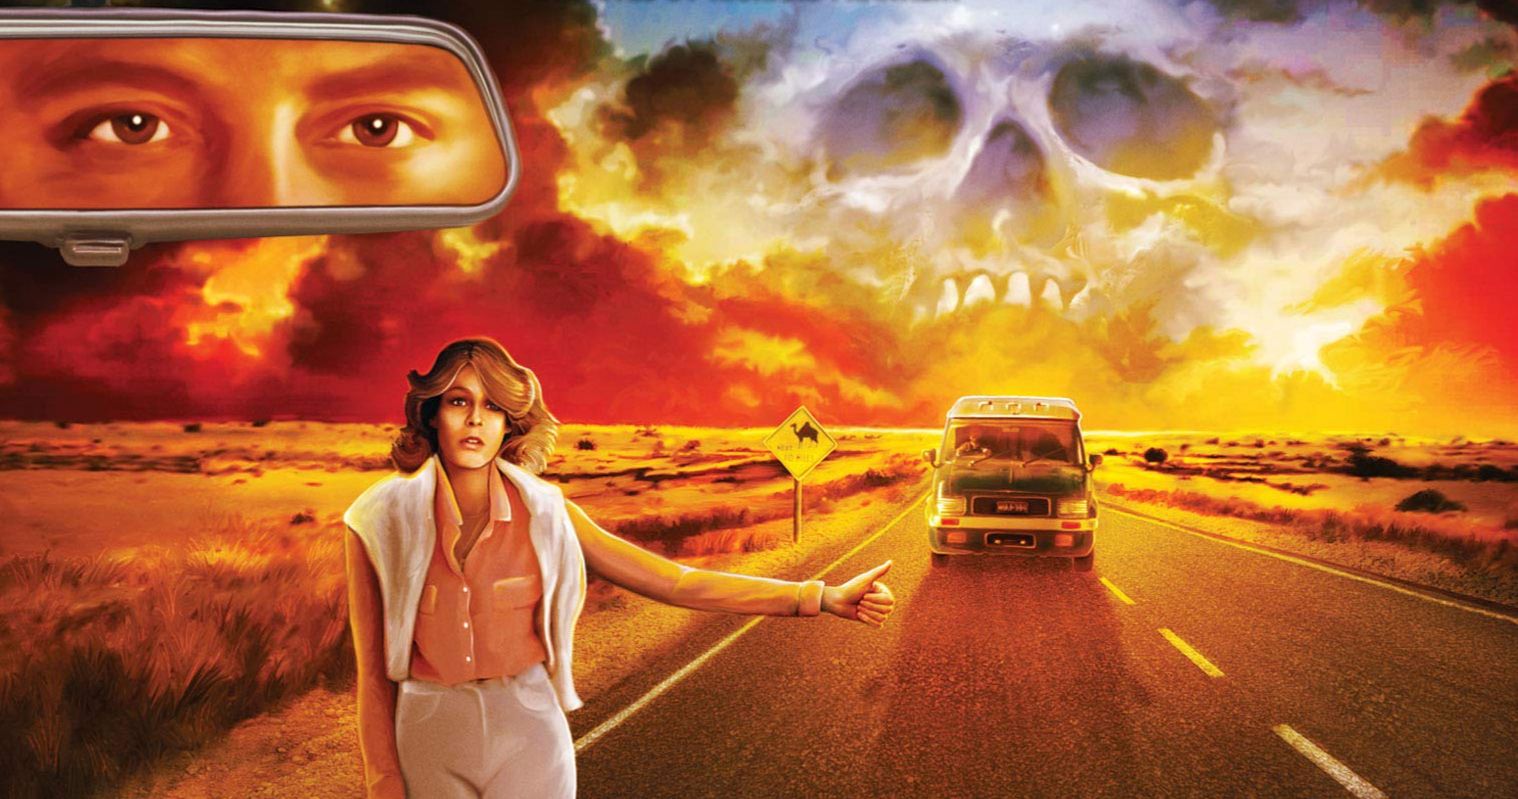 Road Games Collector's Edition Starring Jamie Lee Curtis, Stacy Keach Is Packed with New Features